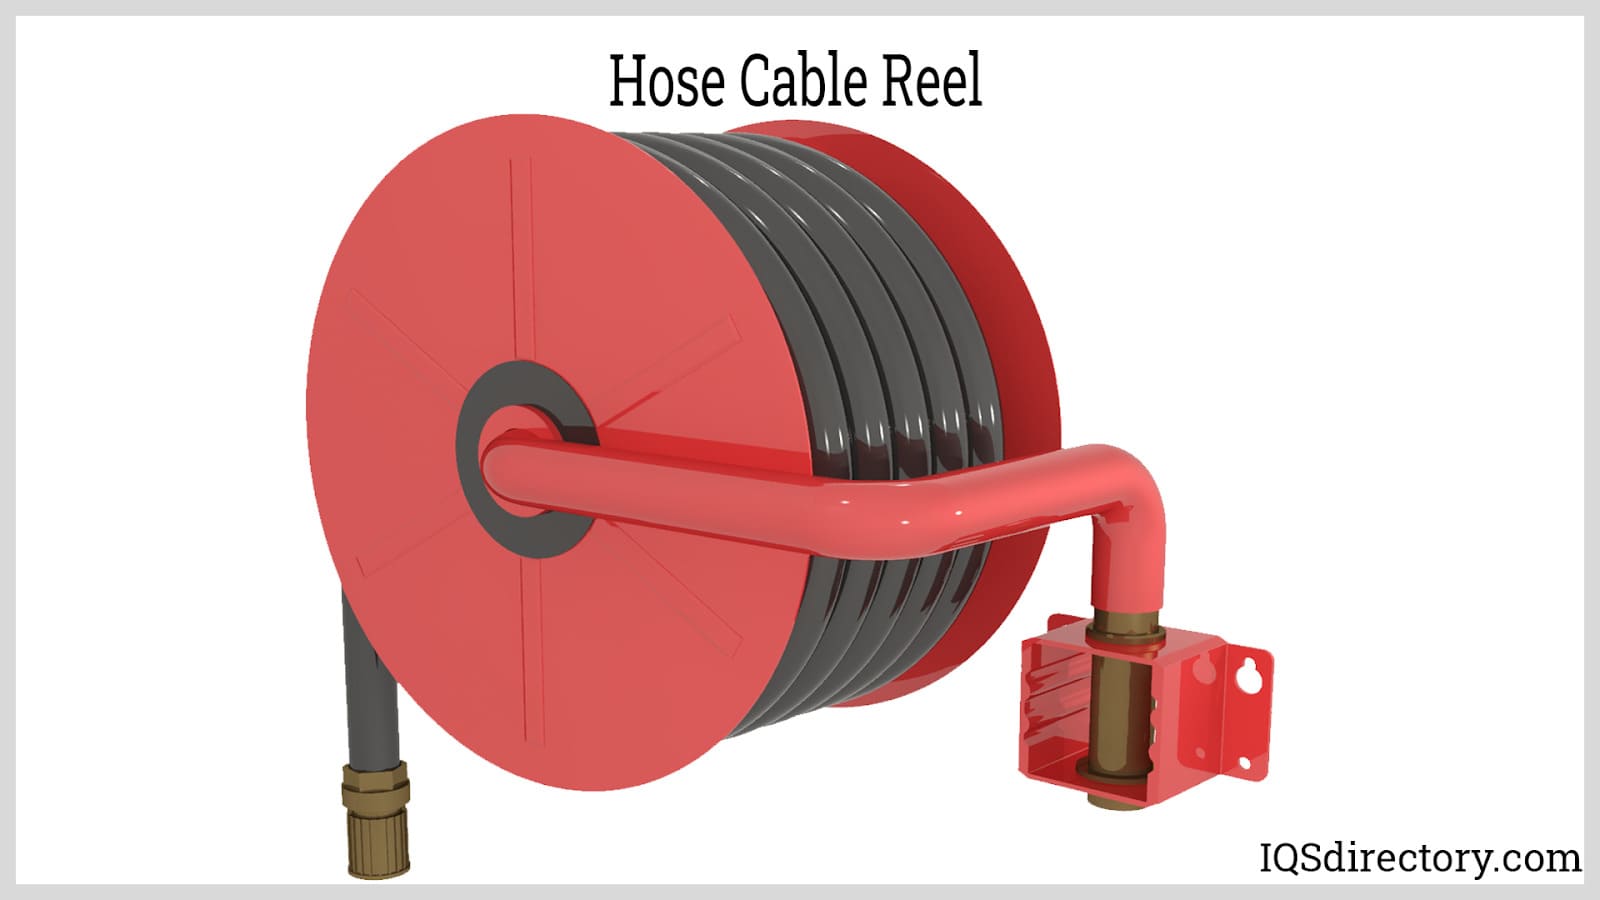 Winding Reels for Cable or Hose 